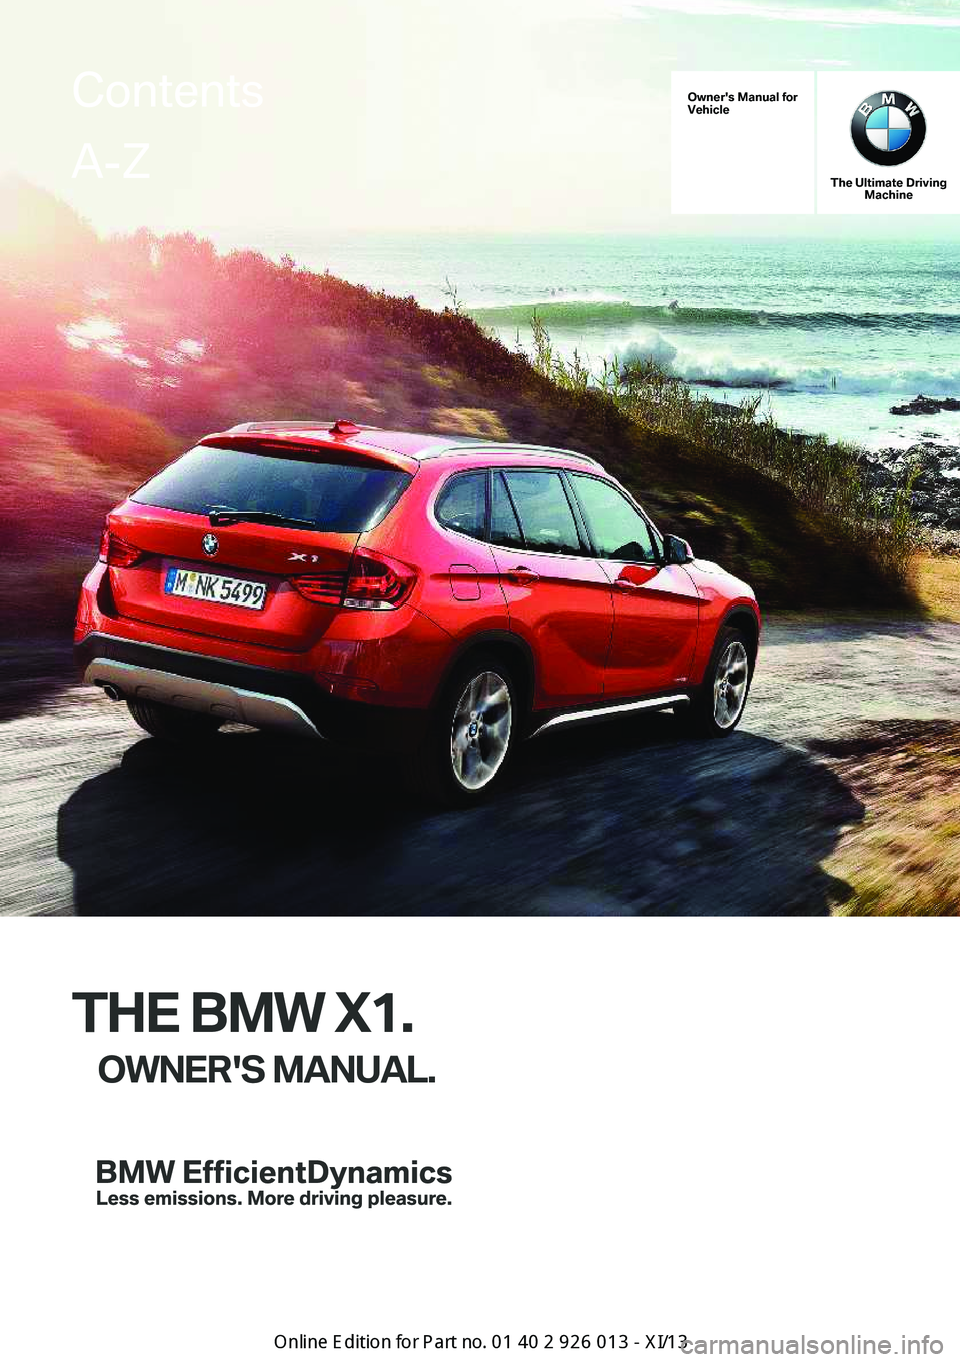 BMW X1 2013 E84 Owners Manual Owner's Manual for
Vehicle
The Ultimate Driving Machine
THE BMW X1.
OWNER'S MANUAL.
ContentsA-Z
Online Edition for Part no. 01 40 2 911 269 - VI/13   